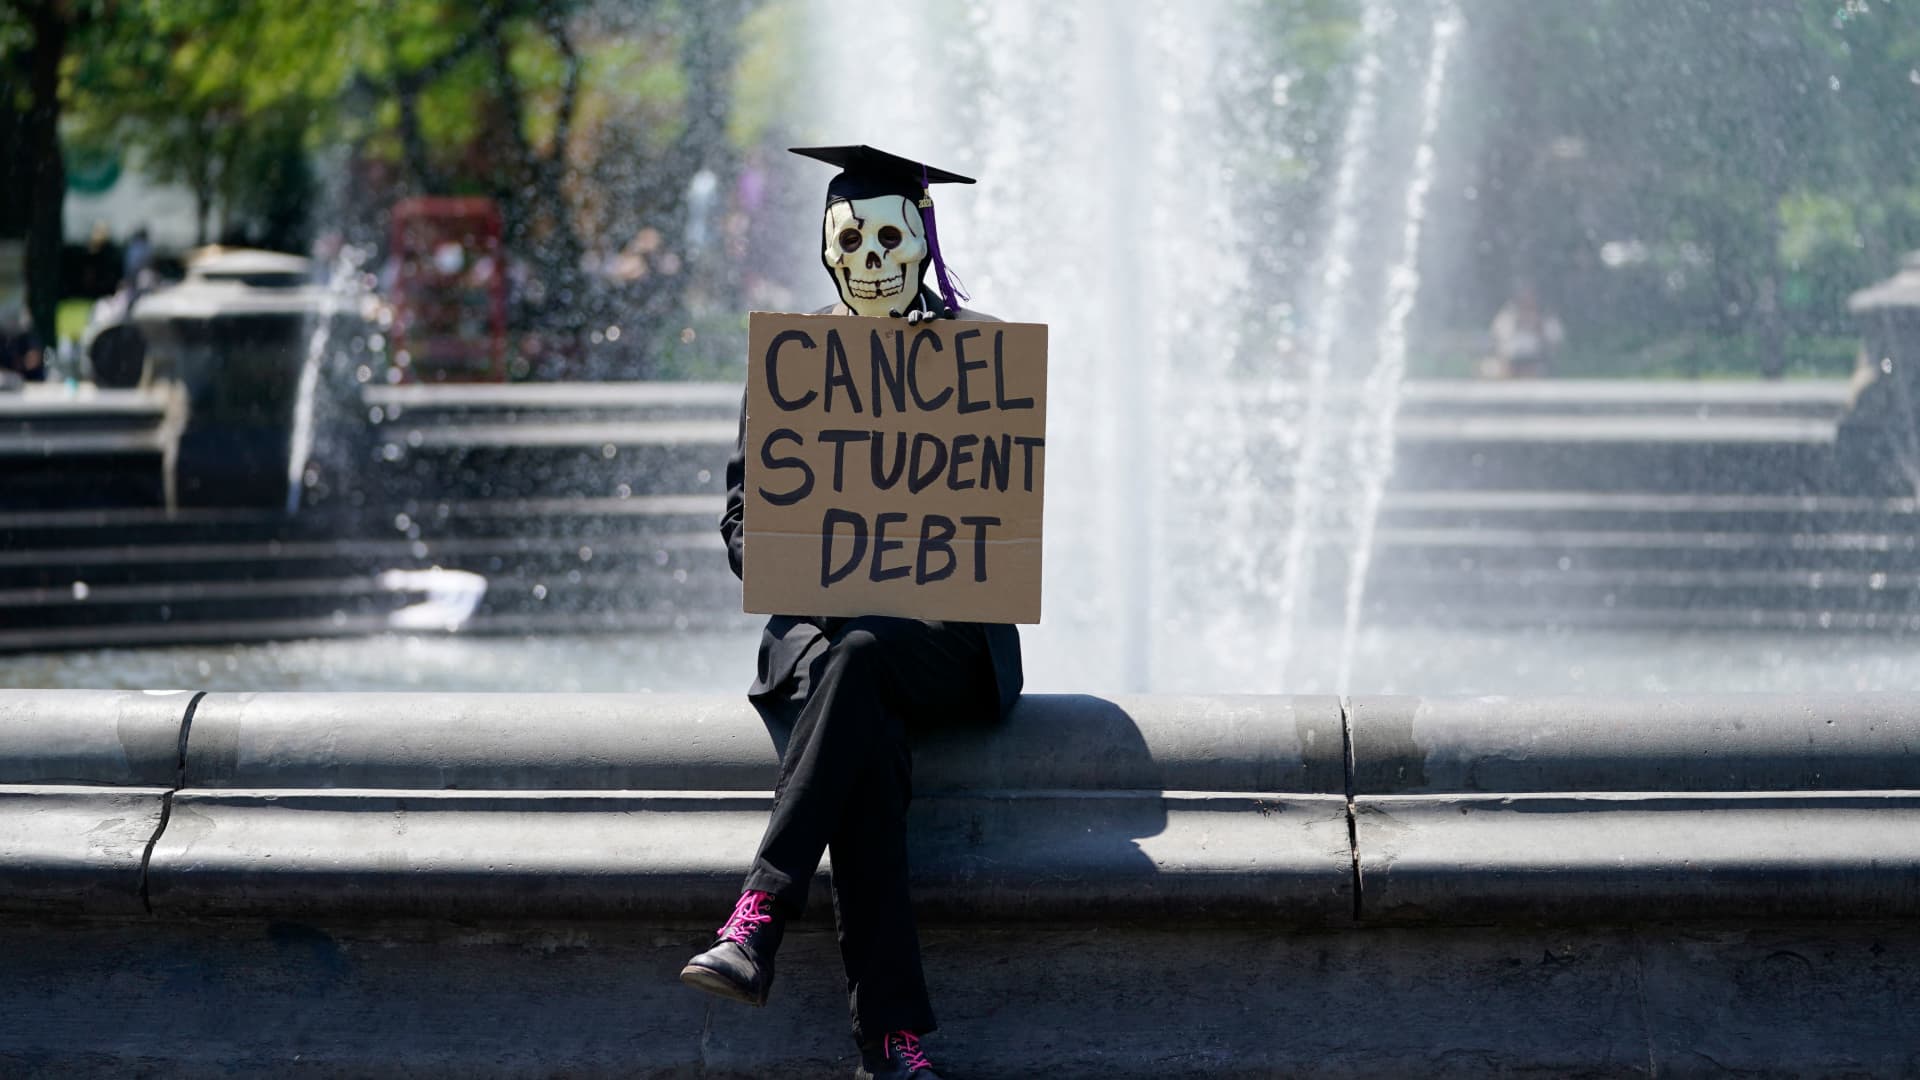 In a reversal, the Education Department is now excluding some borrowers from student loan relief